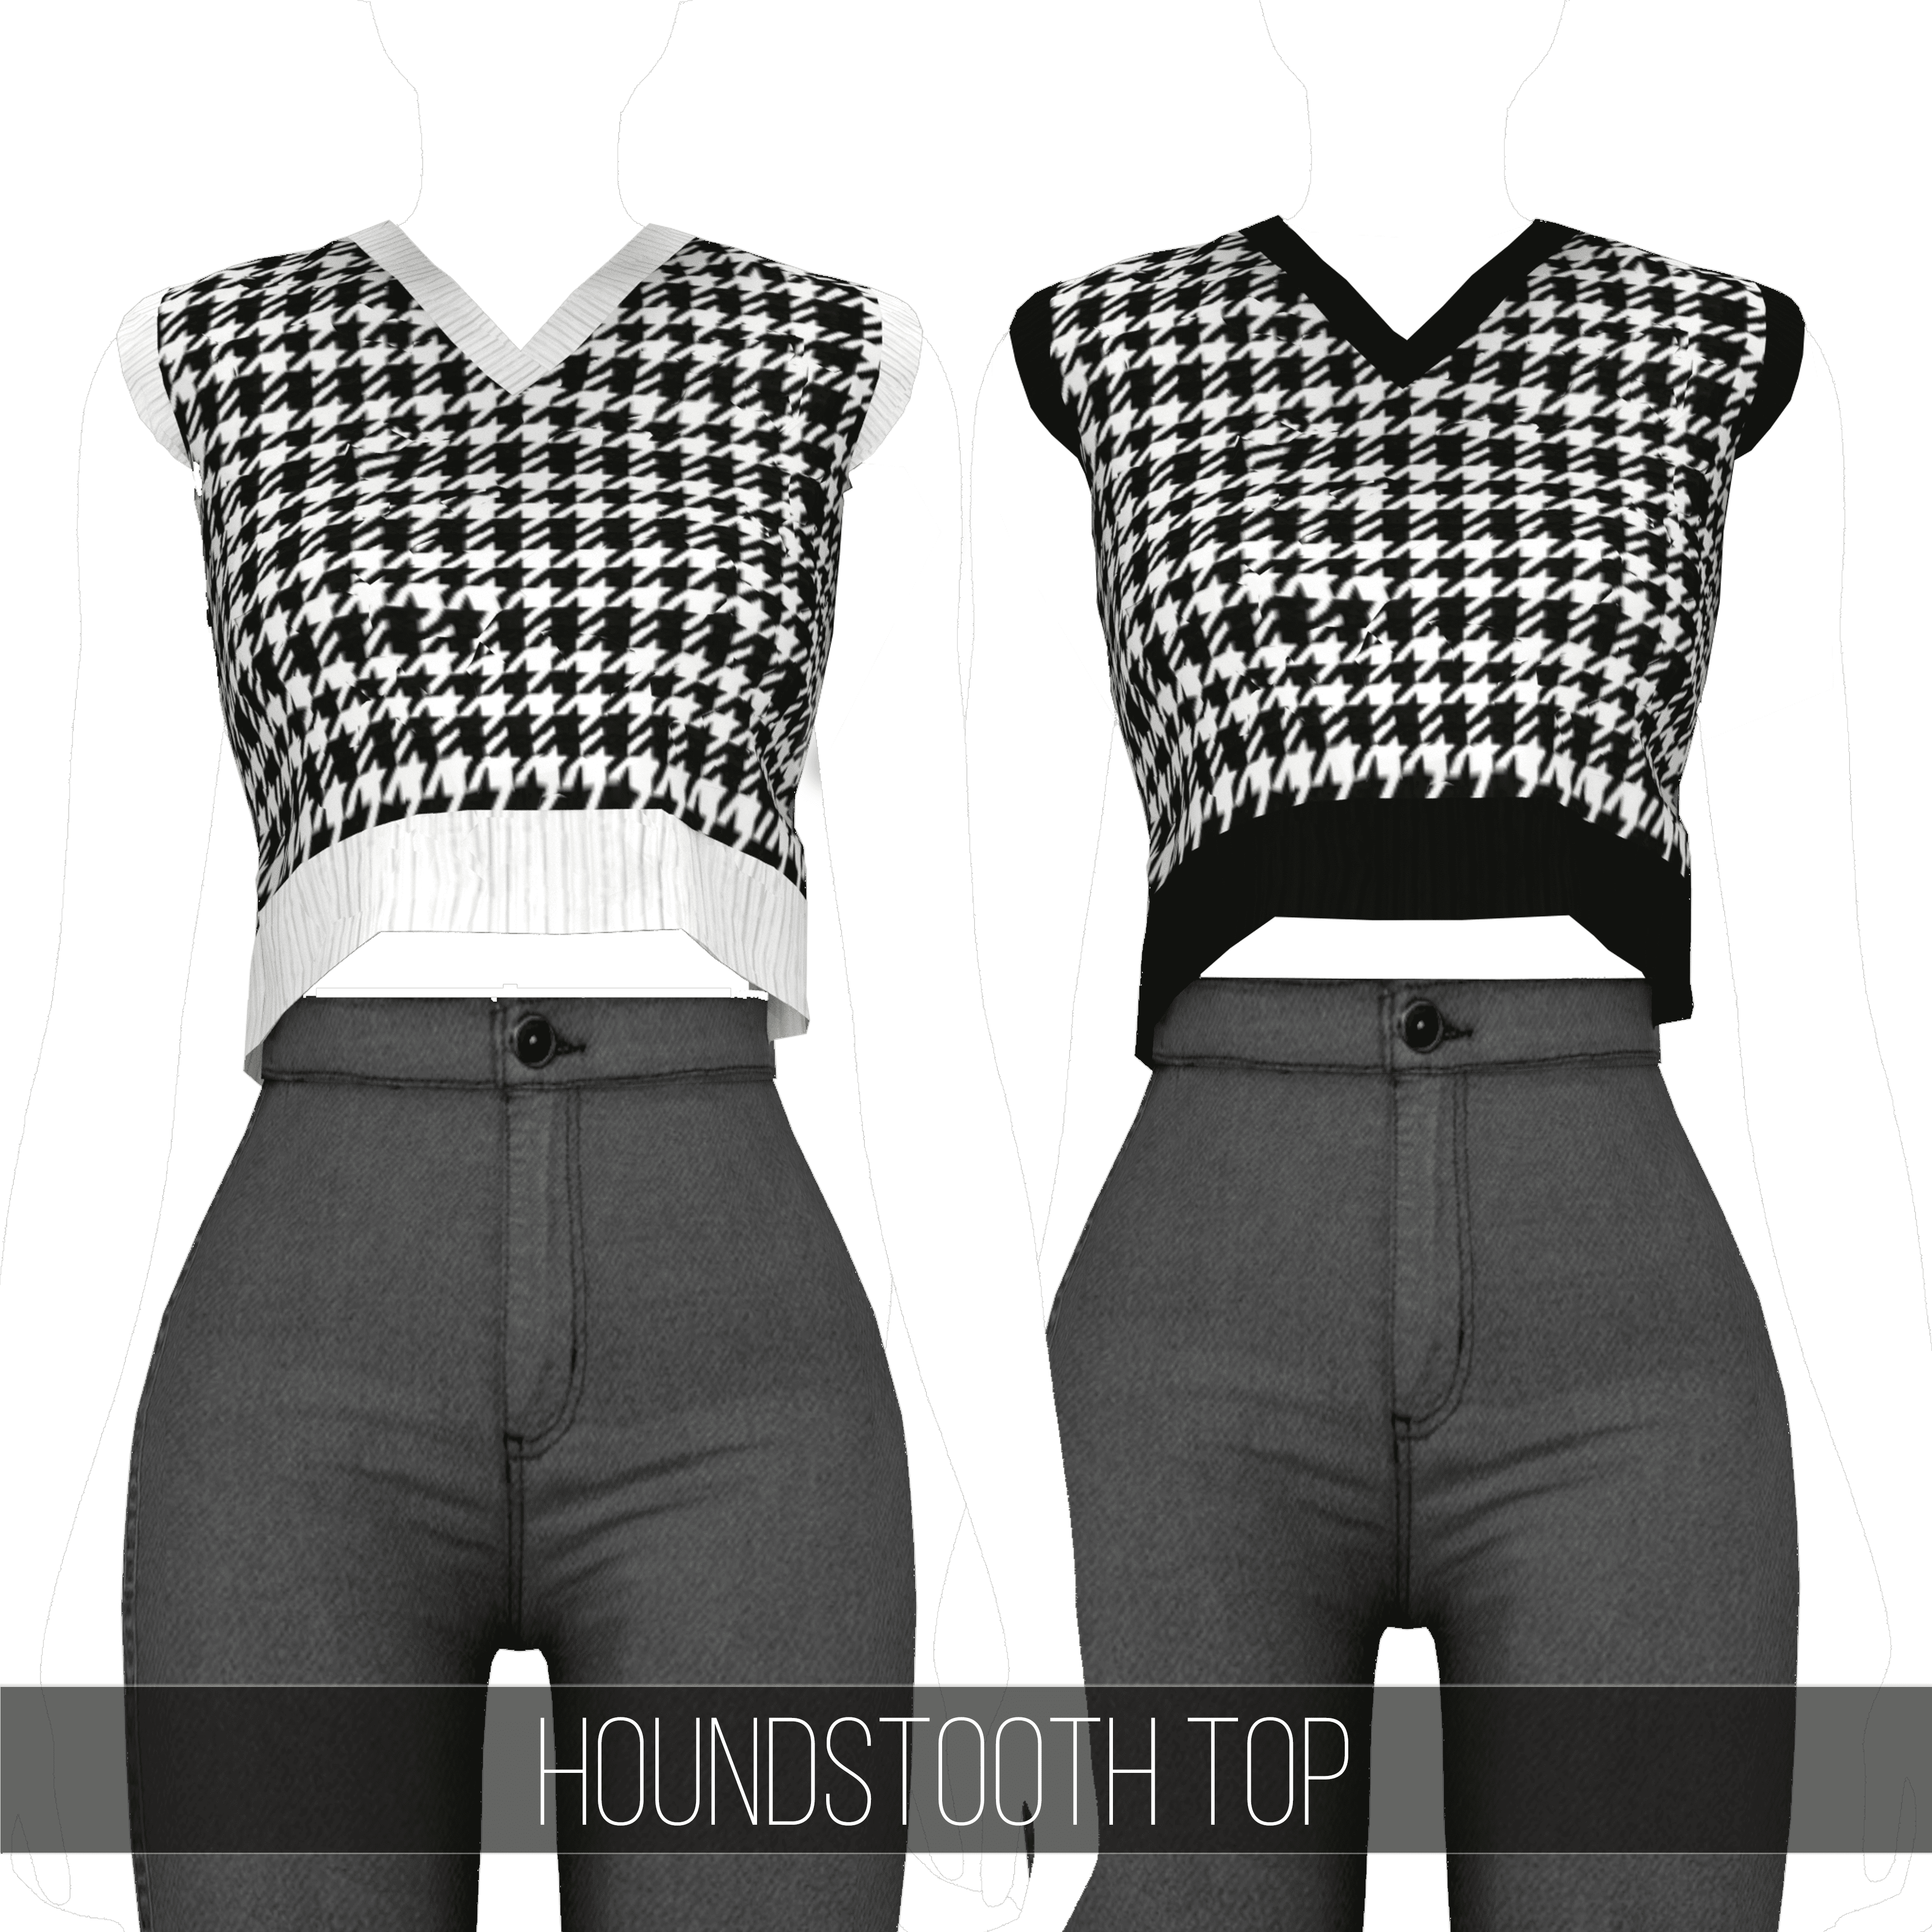 Download HOUNDSTOOTH TOP - The Sims 4 Mods - CurseForge